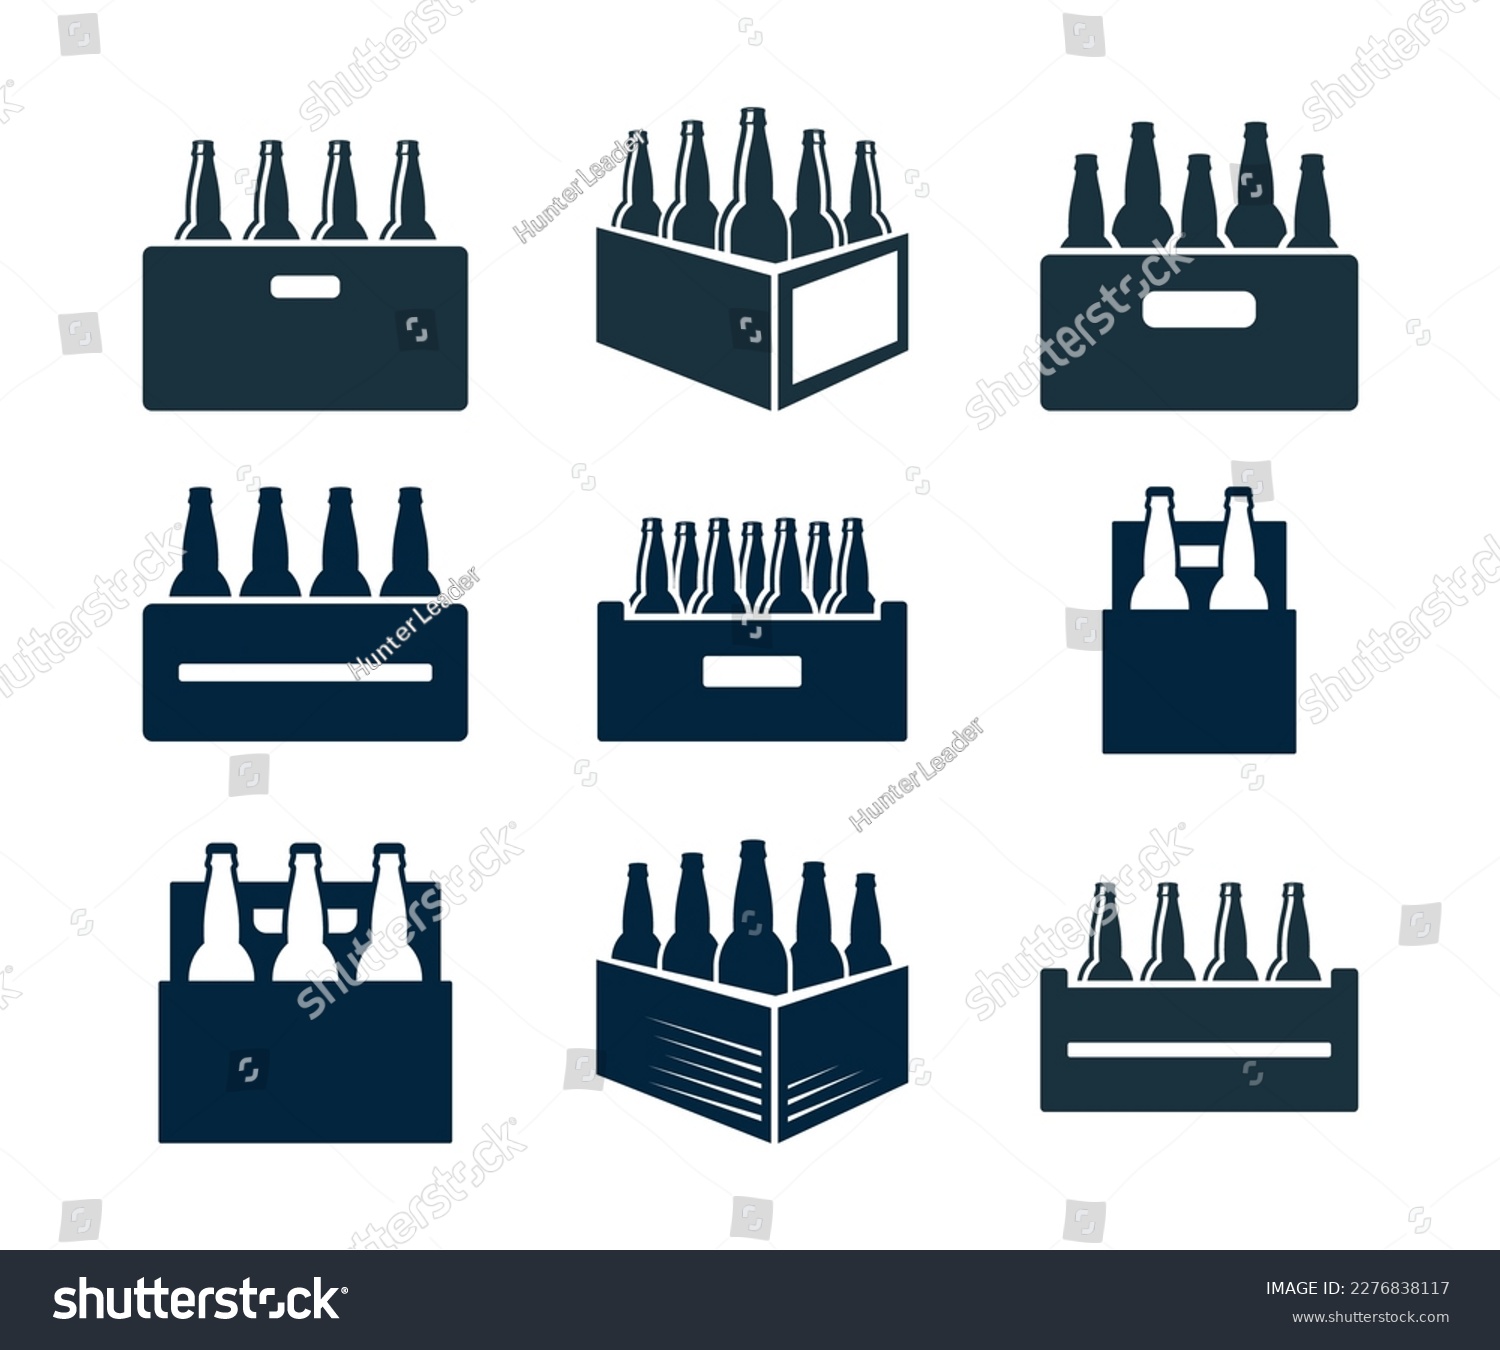 SVG of Beer box icon set. Crate with beer bottles isolated over white svg